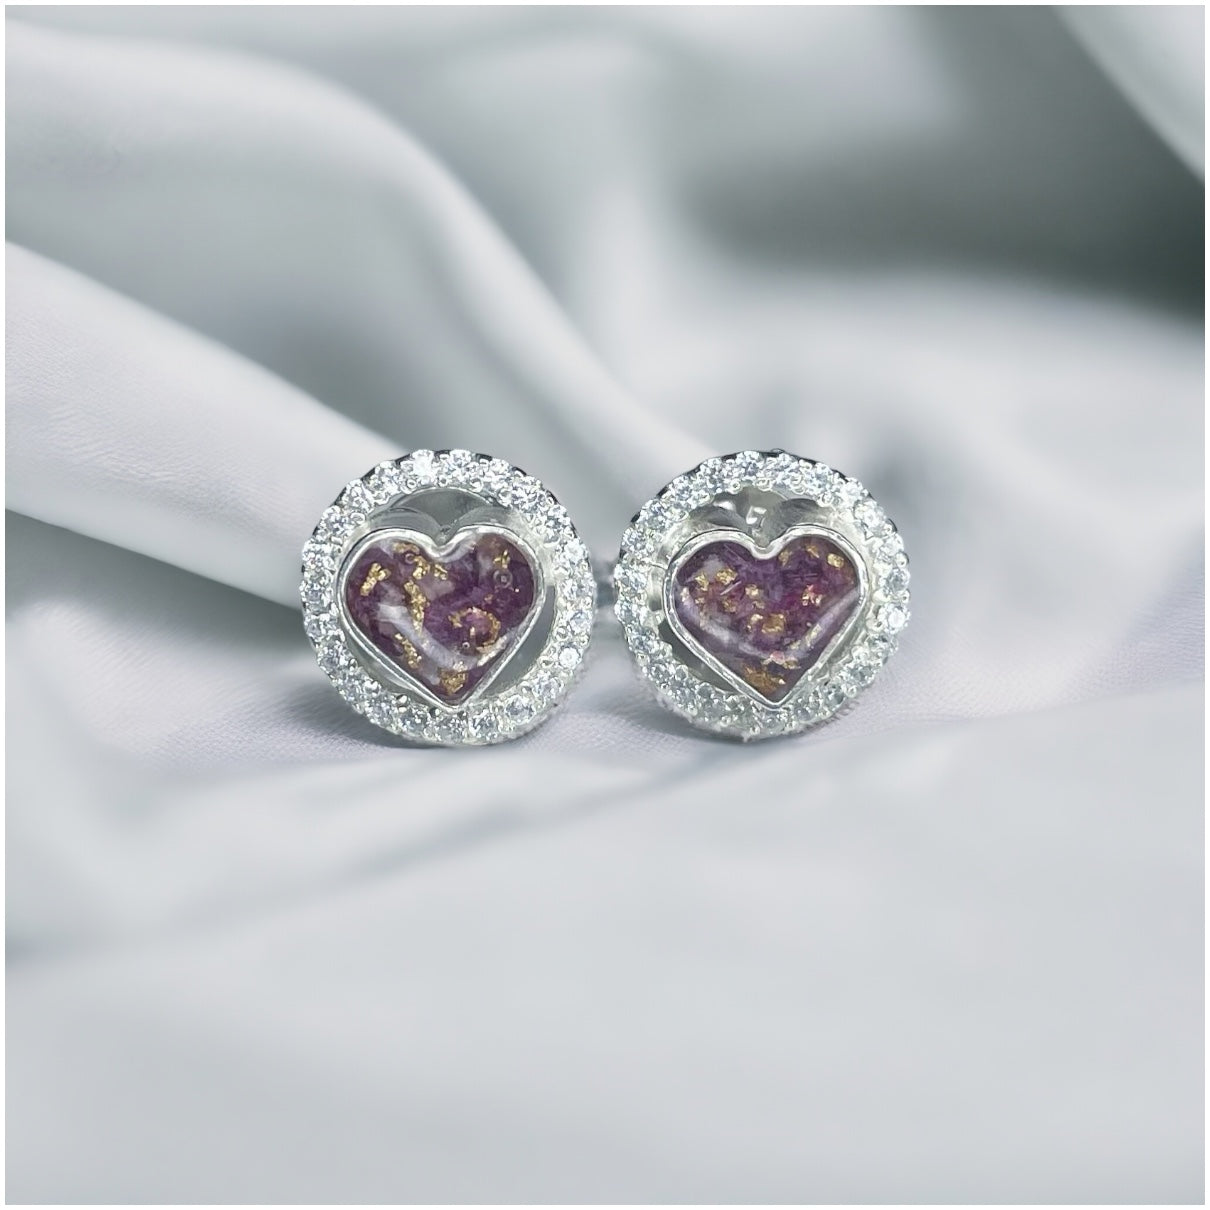 Heart Surround Earrings - Round